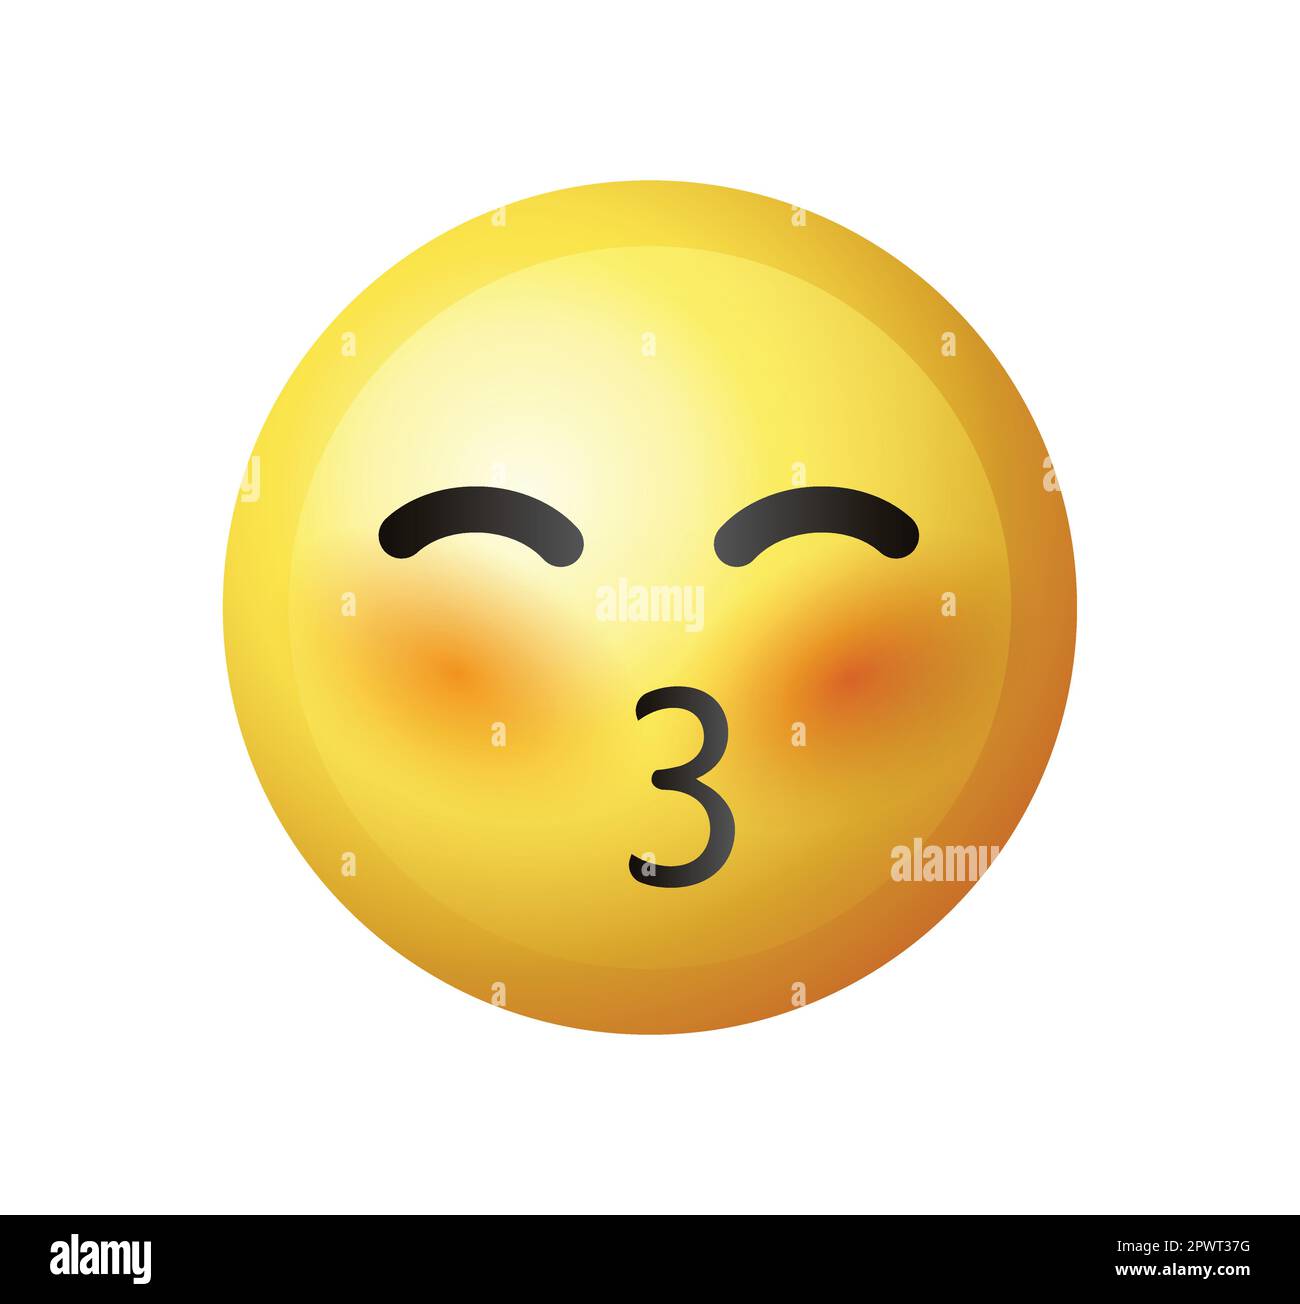 Kiss emoticon icon with closed eyes. A yellow face kiss emoji clipart design. Stock Vector